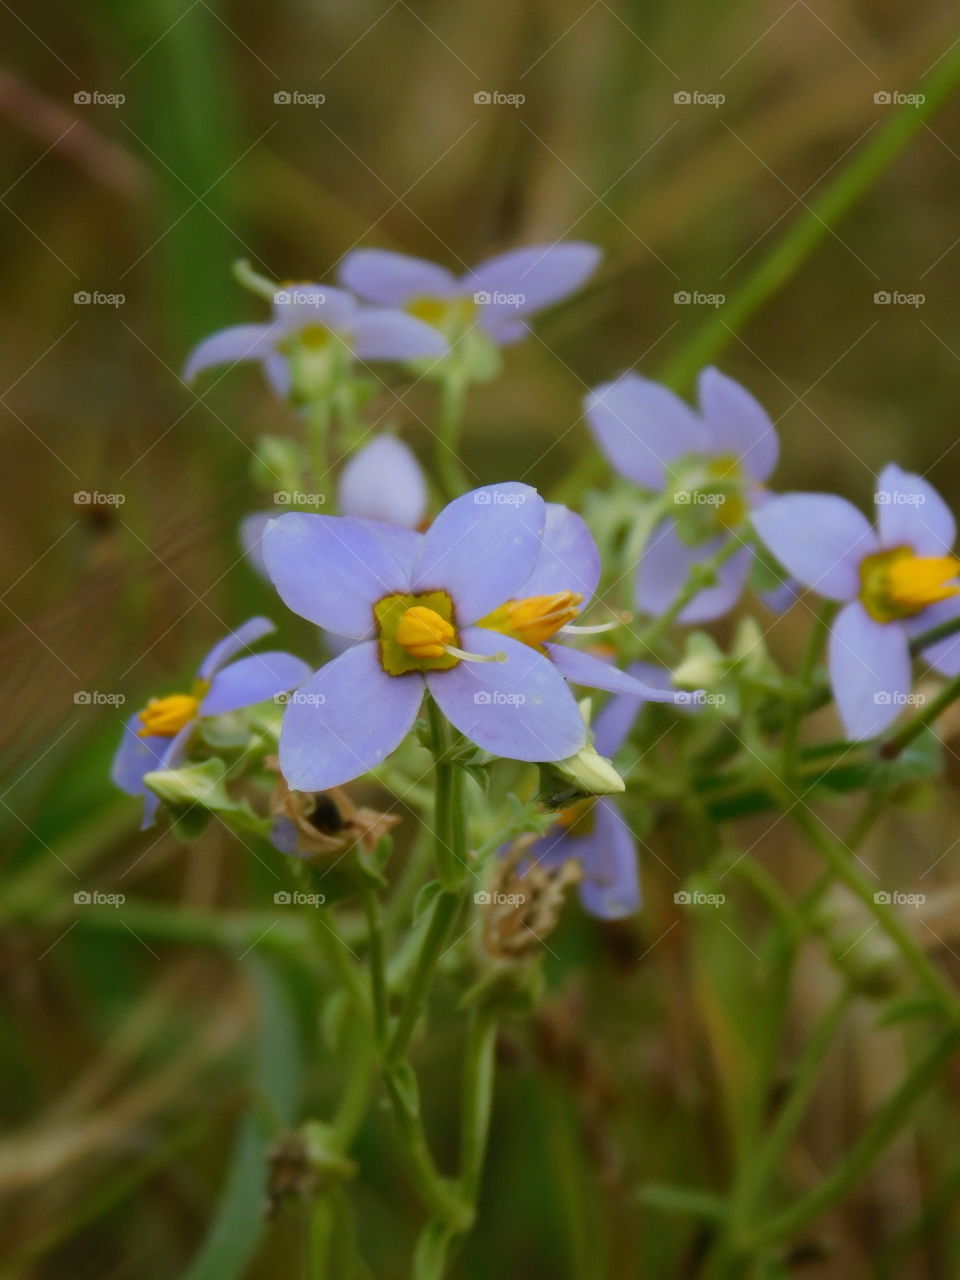 Bunch of flowers  - It is lavender coloured flowers with yellow middle on wild grass looking so attractive on barren land.